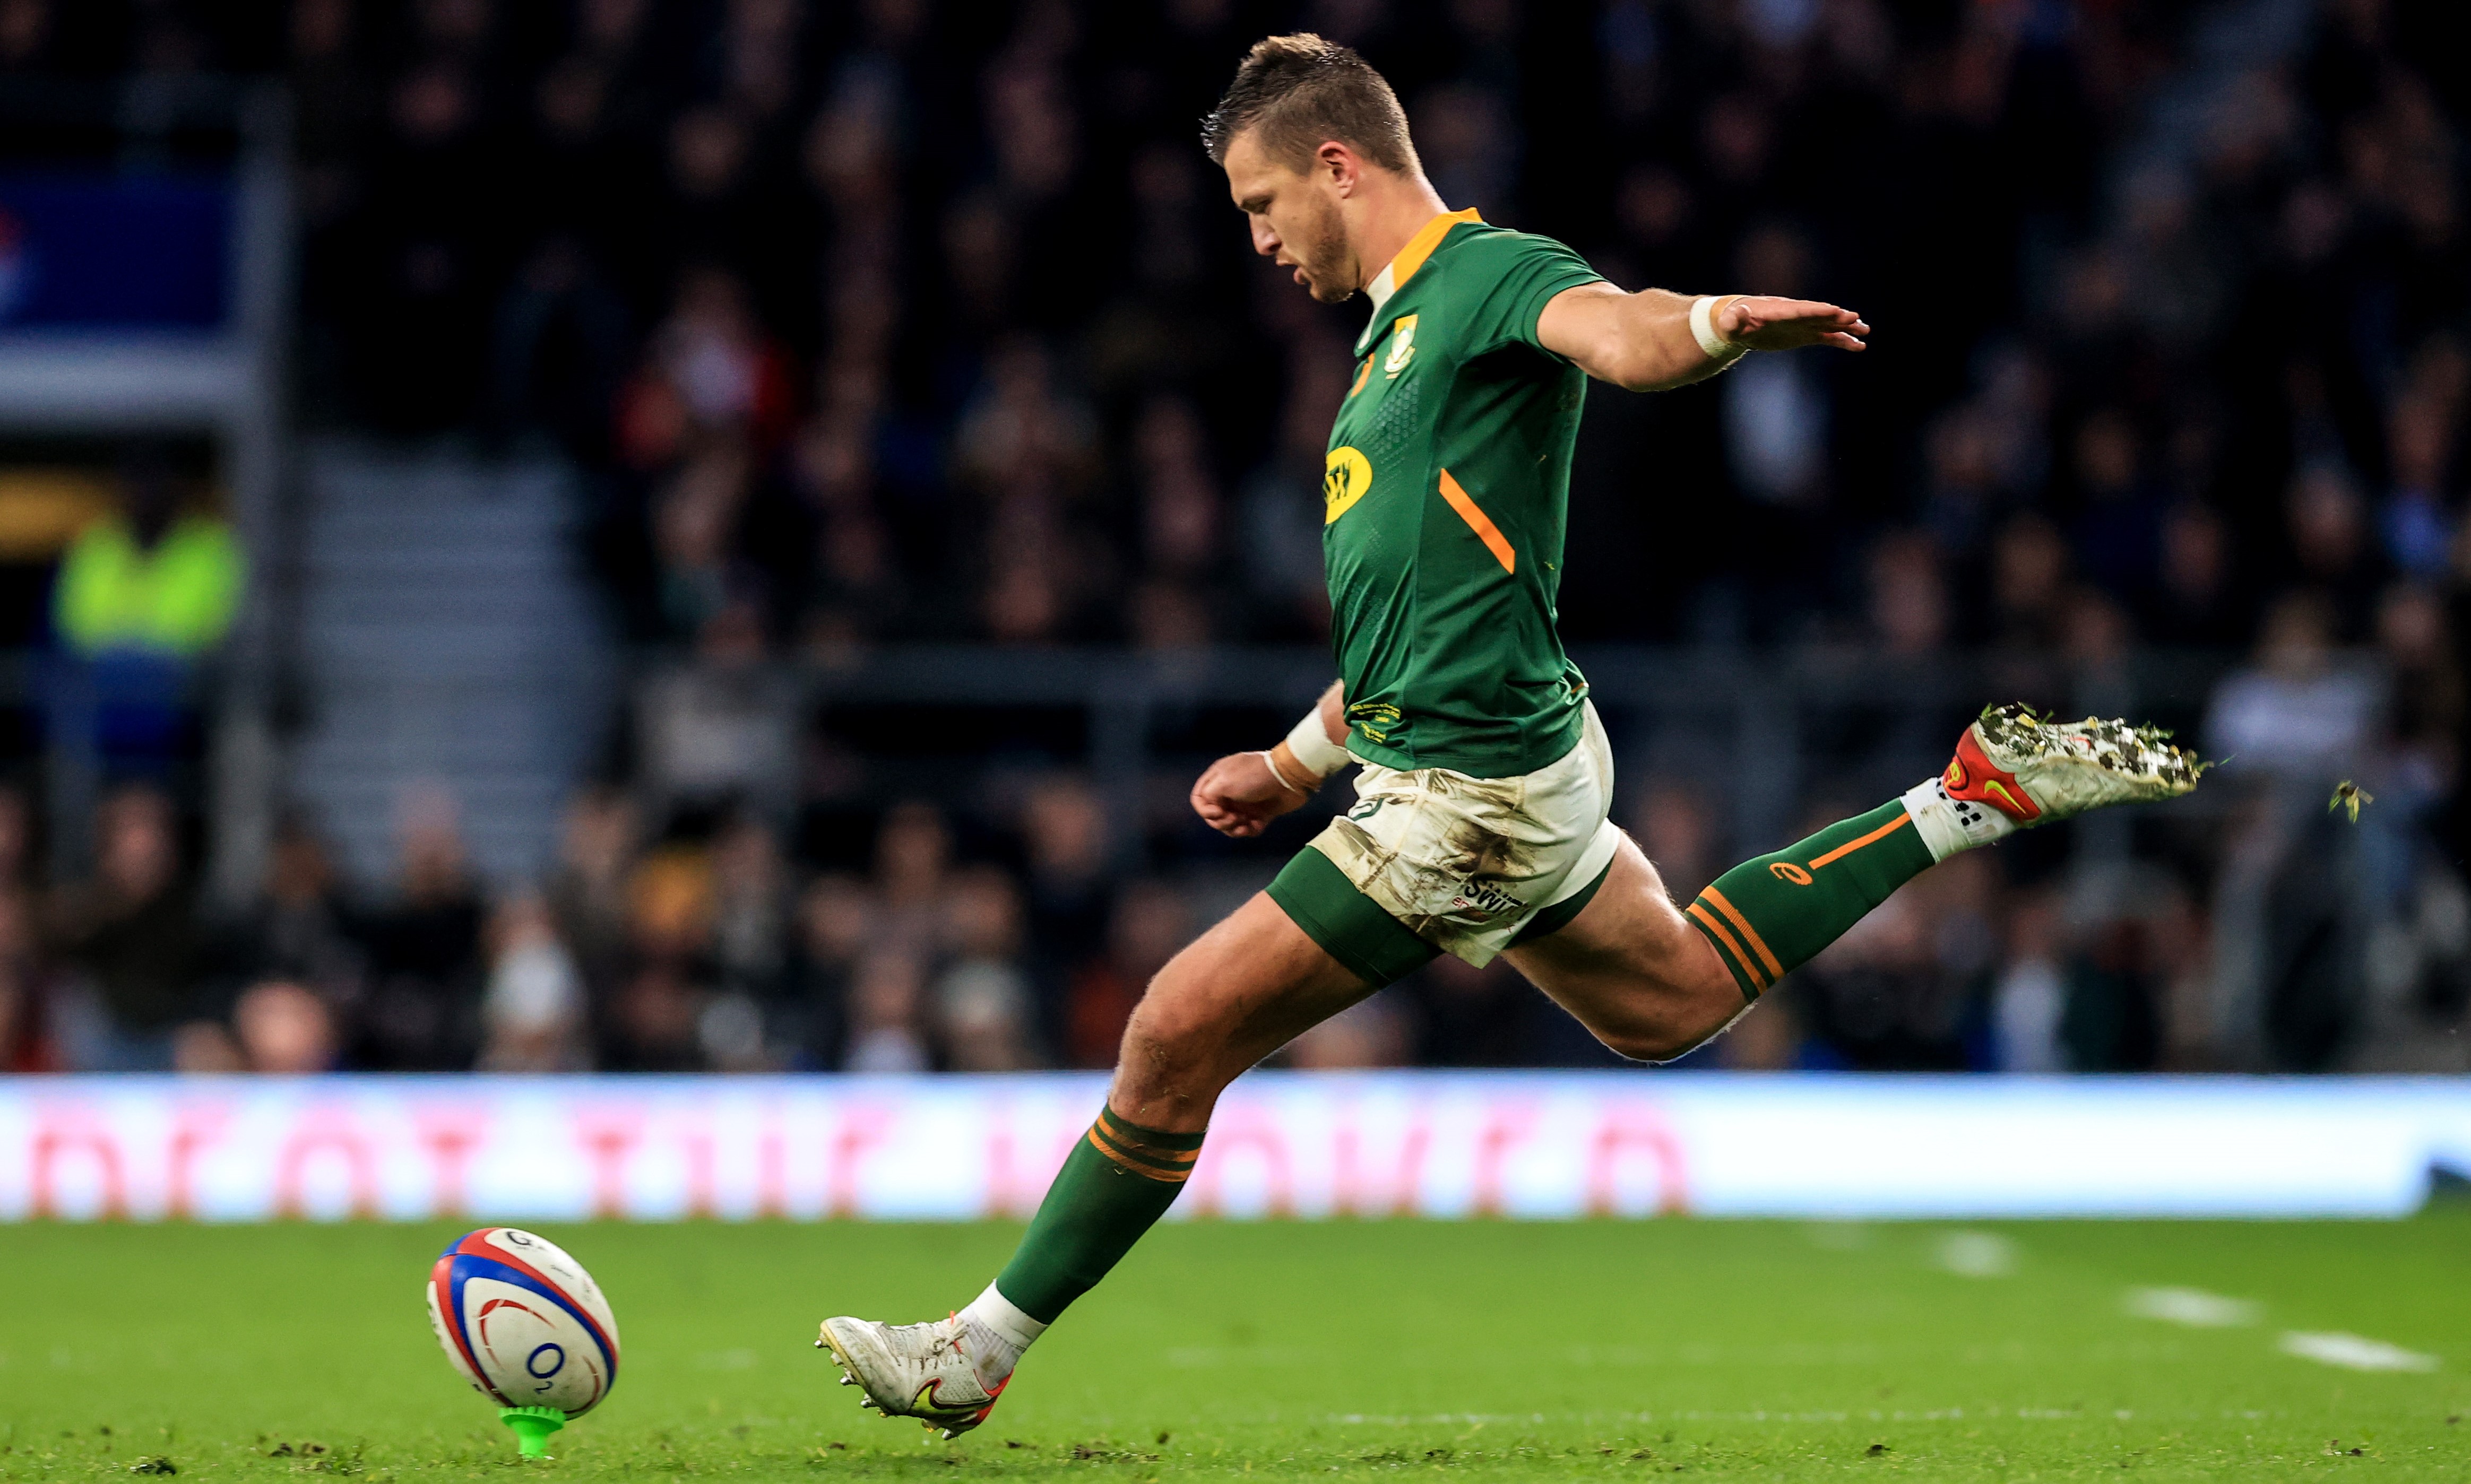 Mandatory Credit: Photo by Billy Stickland/INPHO/Shutterstock/BackpagePix (12611048z) England vs South Africa. South Africa's Handre Pollard takes a kick Autumn Nations Series, Twickenham Stadium, London, England - 20 Nov 2021